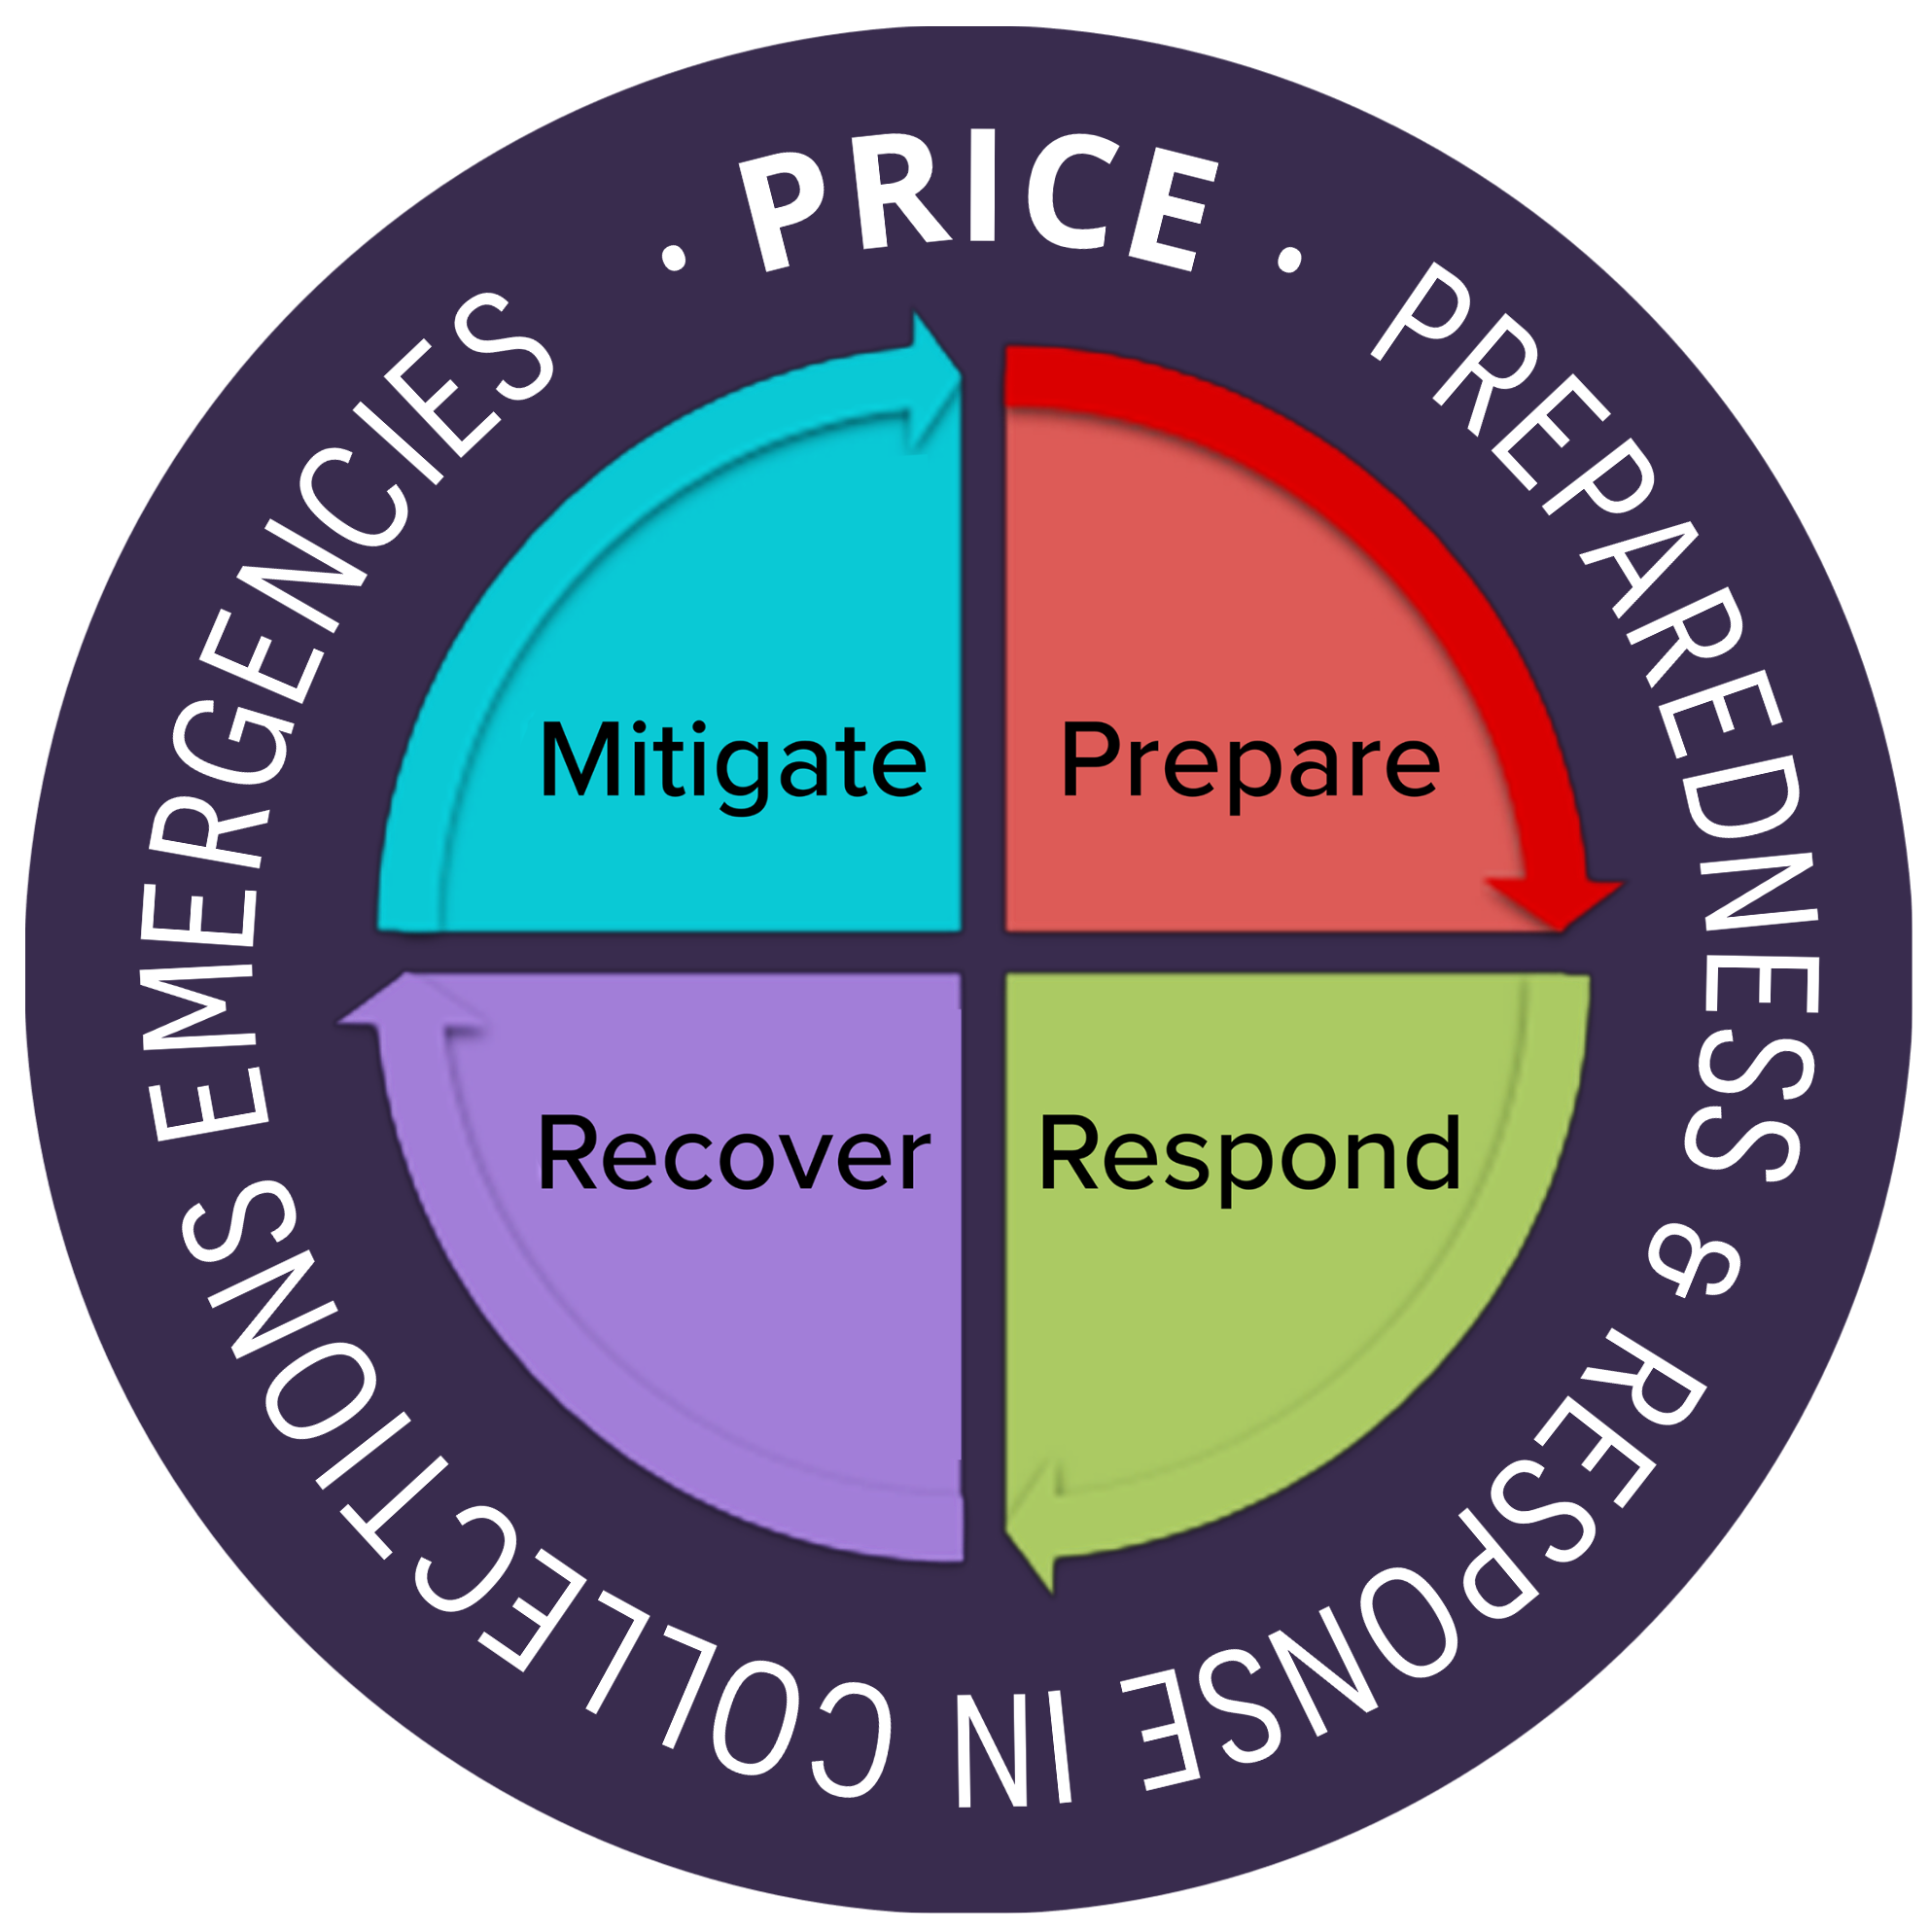 Circular logo with "PRICE: Preparedness and Response in Collections Emergencies" surrounding  "Mitigate, Prepare, Respond, Recover"